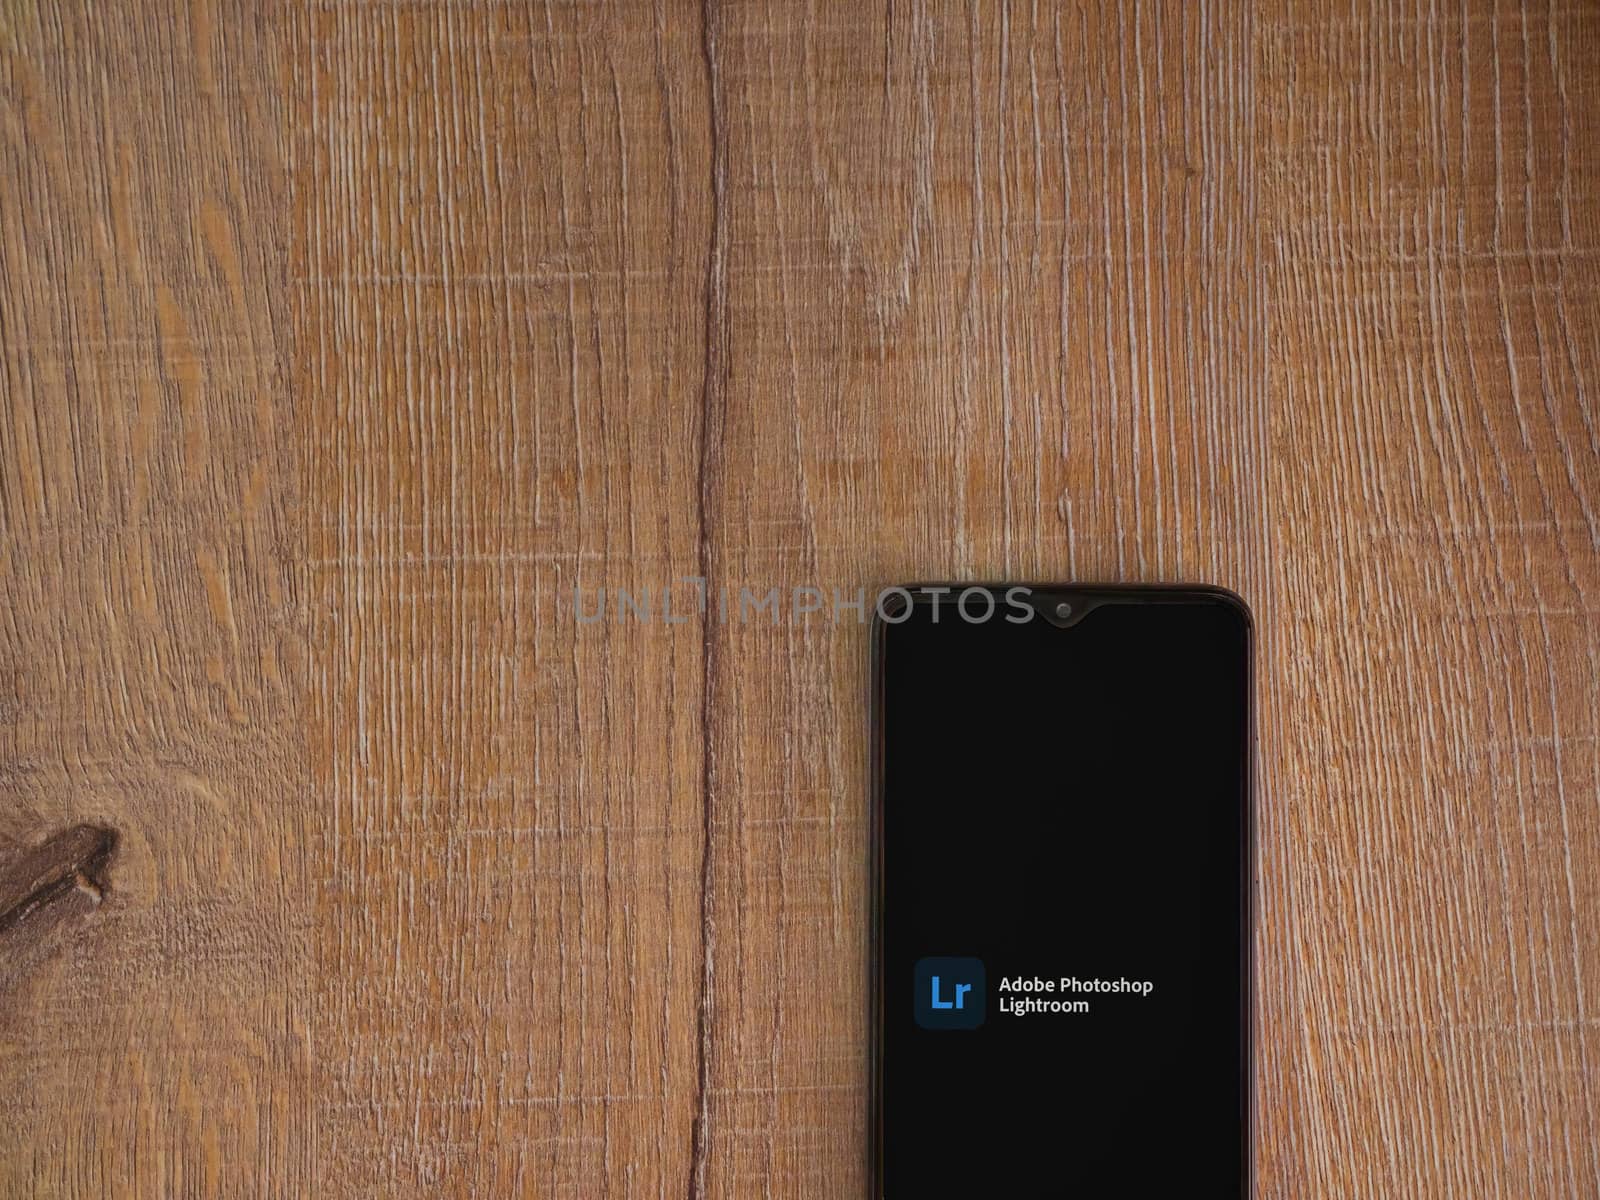 Lod, Israel - July 8, 2020: Adobe Lightroom - Photo Editor and Pro Camera app launch screen with logo on the display of a black mobile smartphone on wooden background. Top view flat lay with copy space.